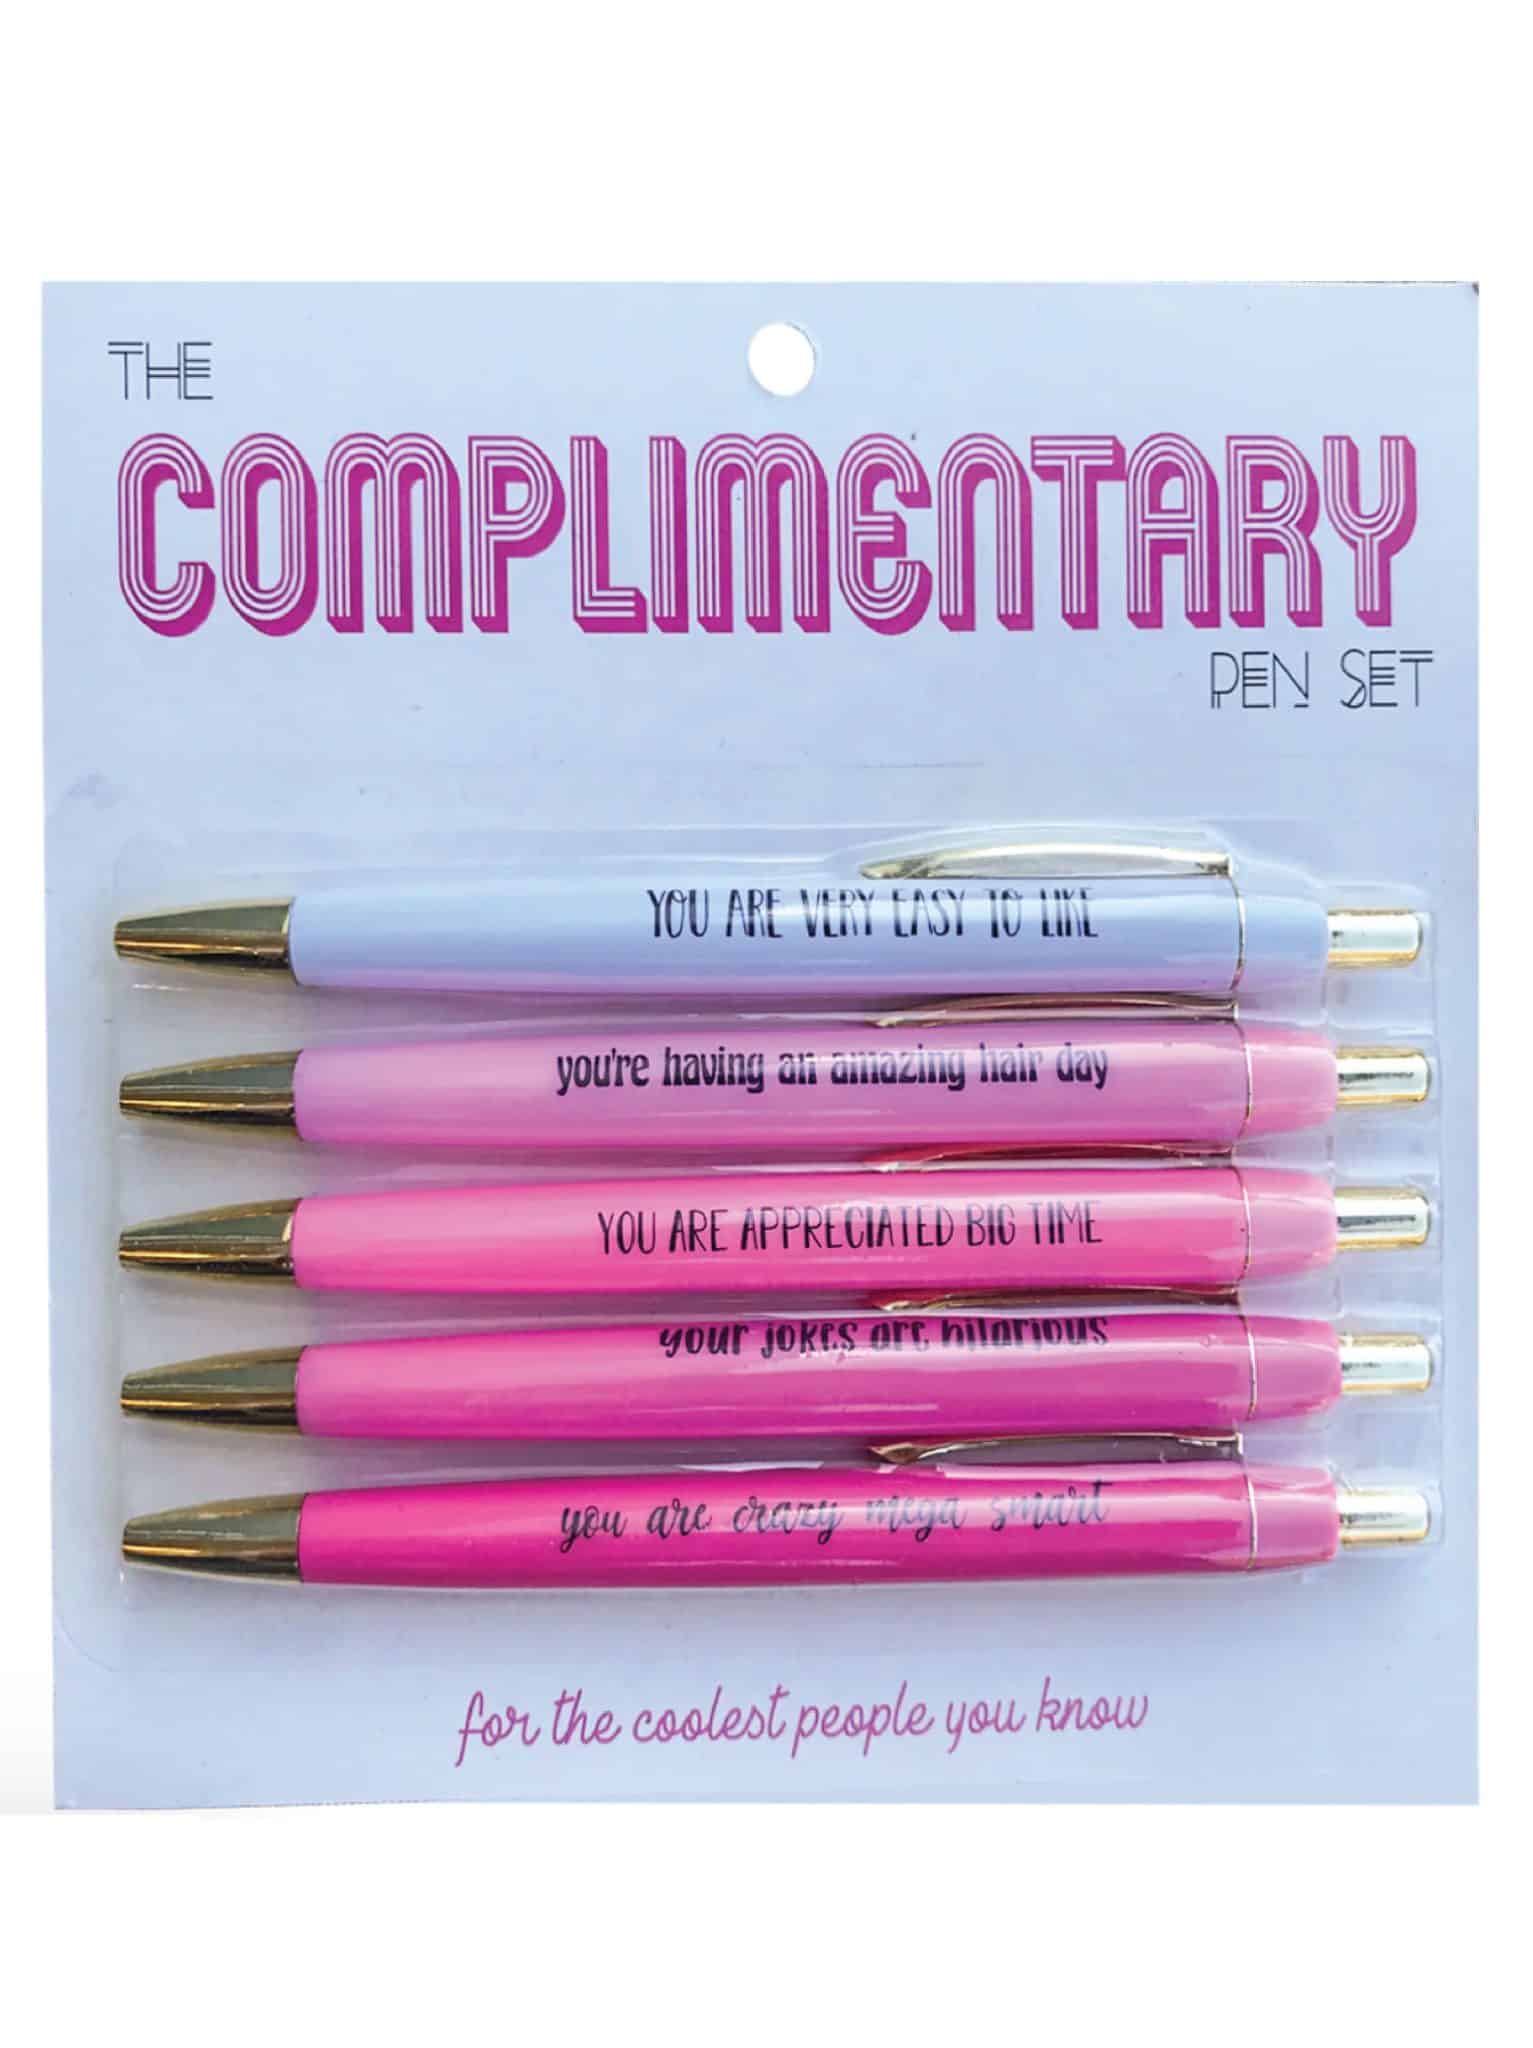 https://www.bemadeinc.com/wp-content/uploads/2023/10/be-made-hays-pen-set-shop-fun-club-funny-gift-stocking-stuffer-gift-under-20-compliments-positive-self-talk-gifts-complimentary-01-scaled.jpg